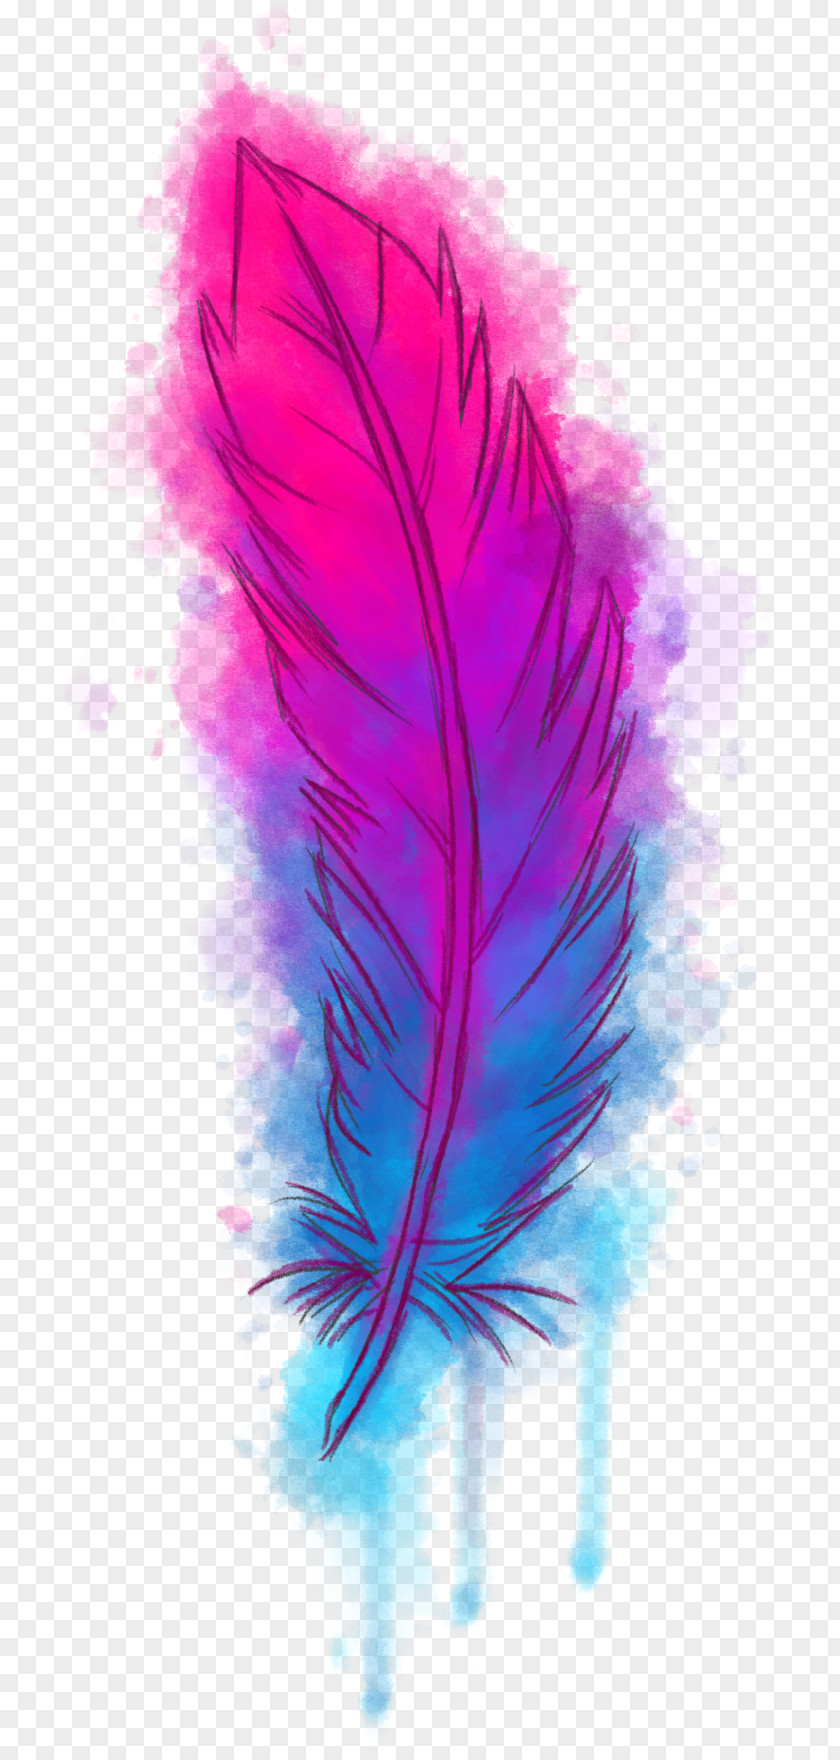 Watercolour Transparent Feather Drawing Sticker Watercolor Painting PNG